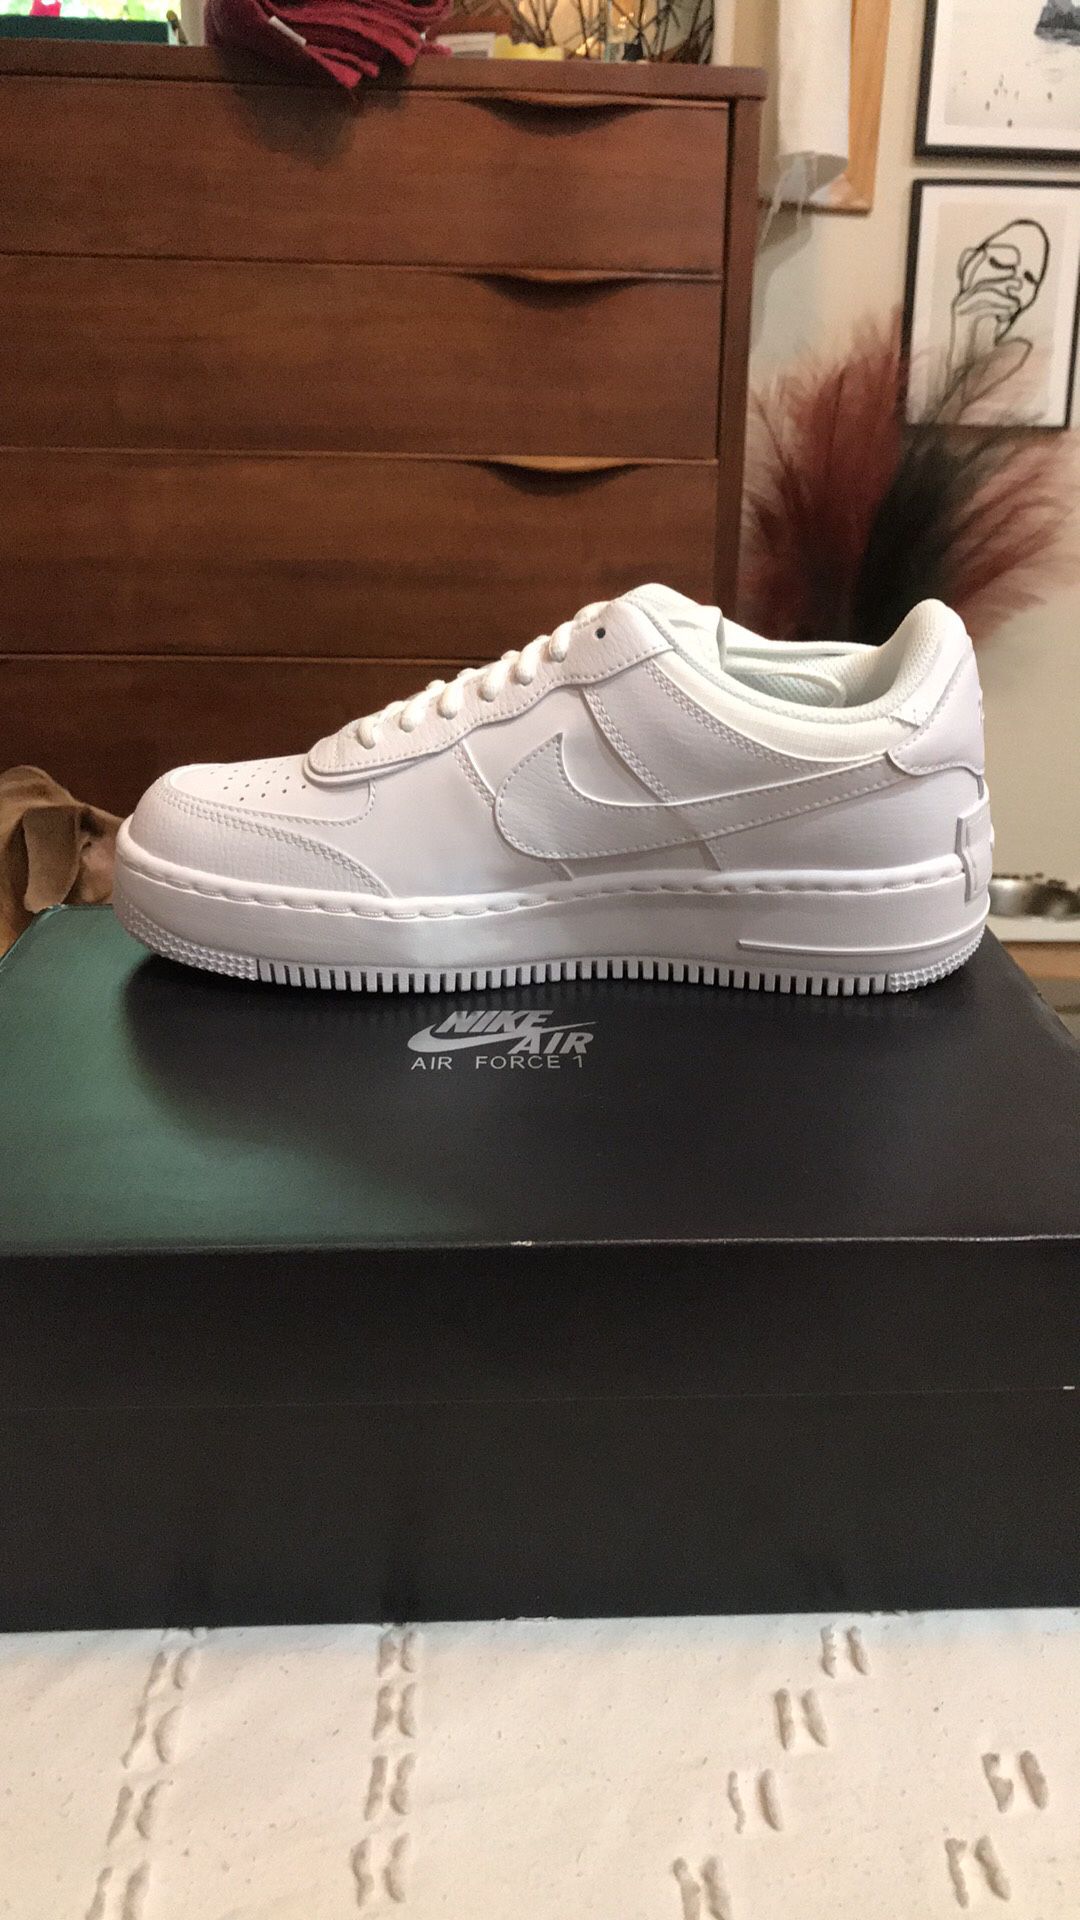 Air Force 1 Shadow Never Used